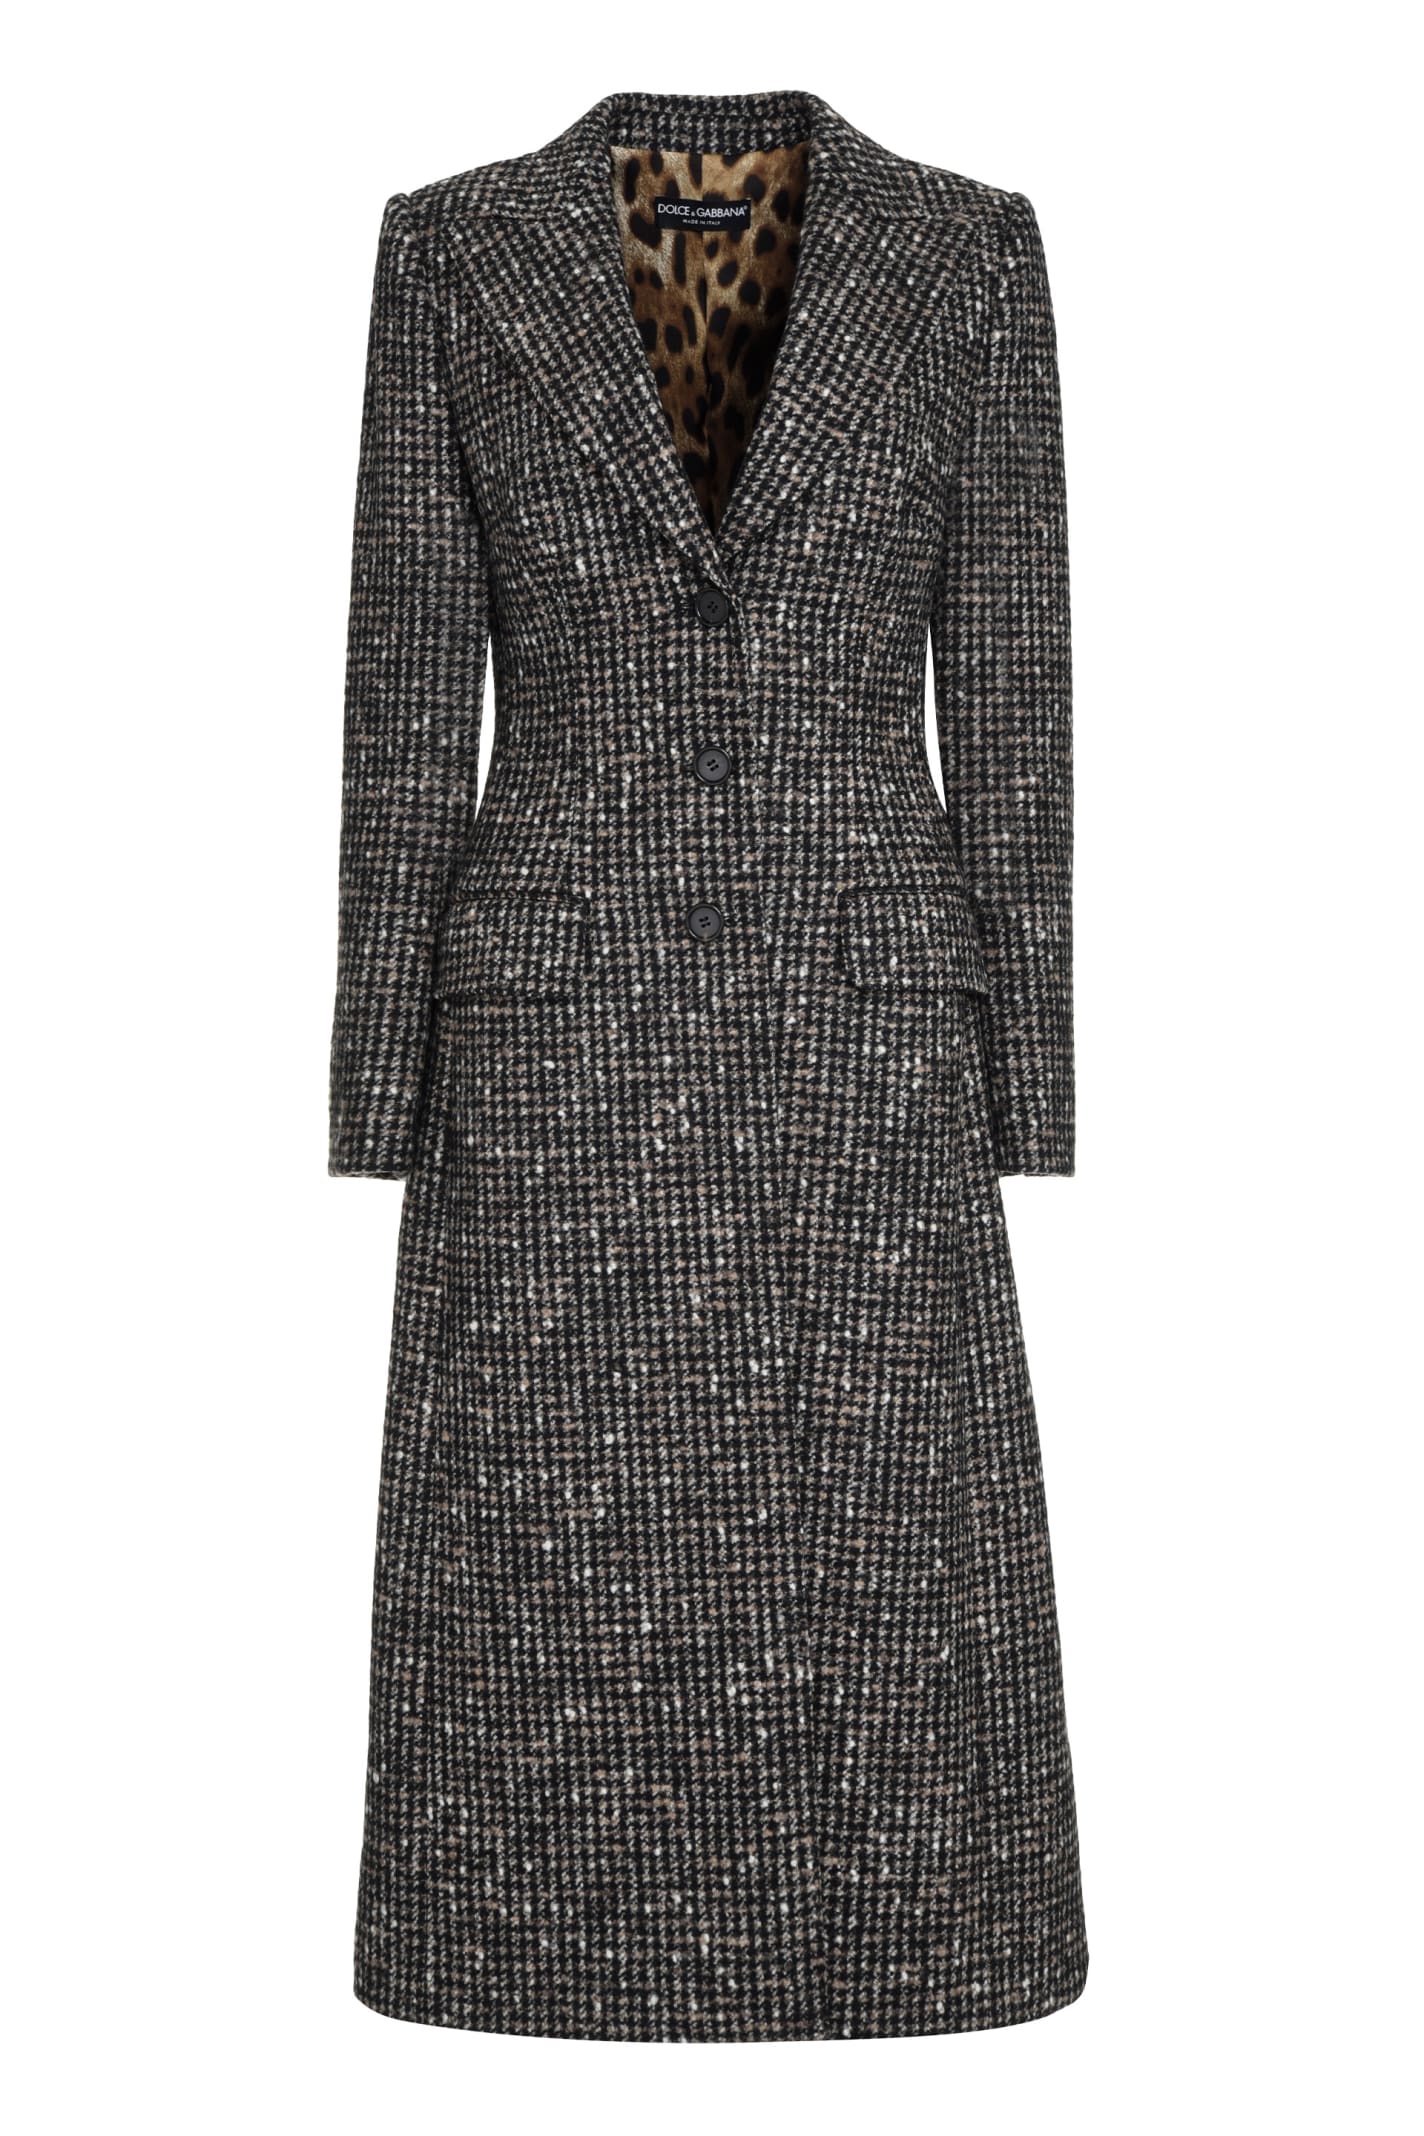 Dolce & Gabbana Checked Wool Long Coat In Multicolor